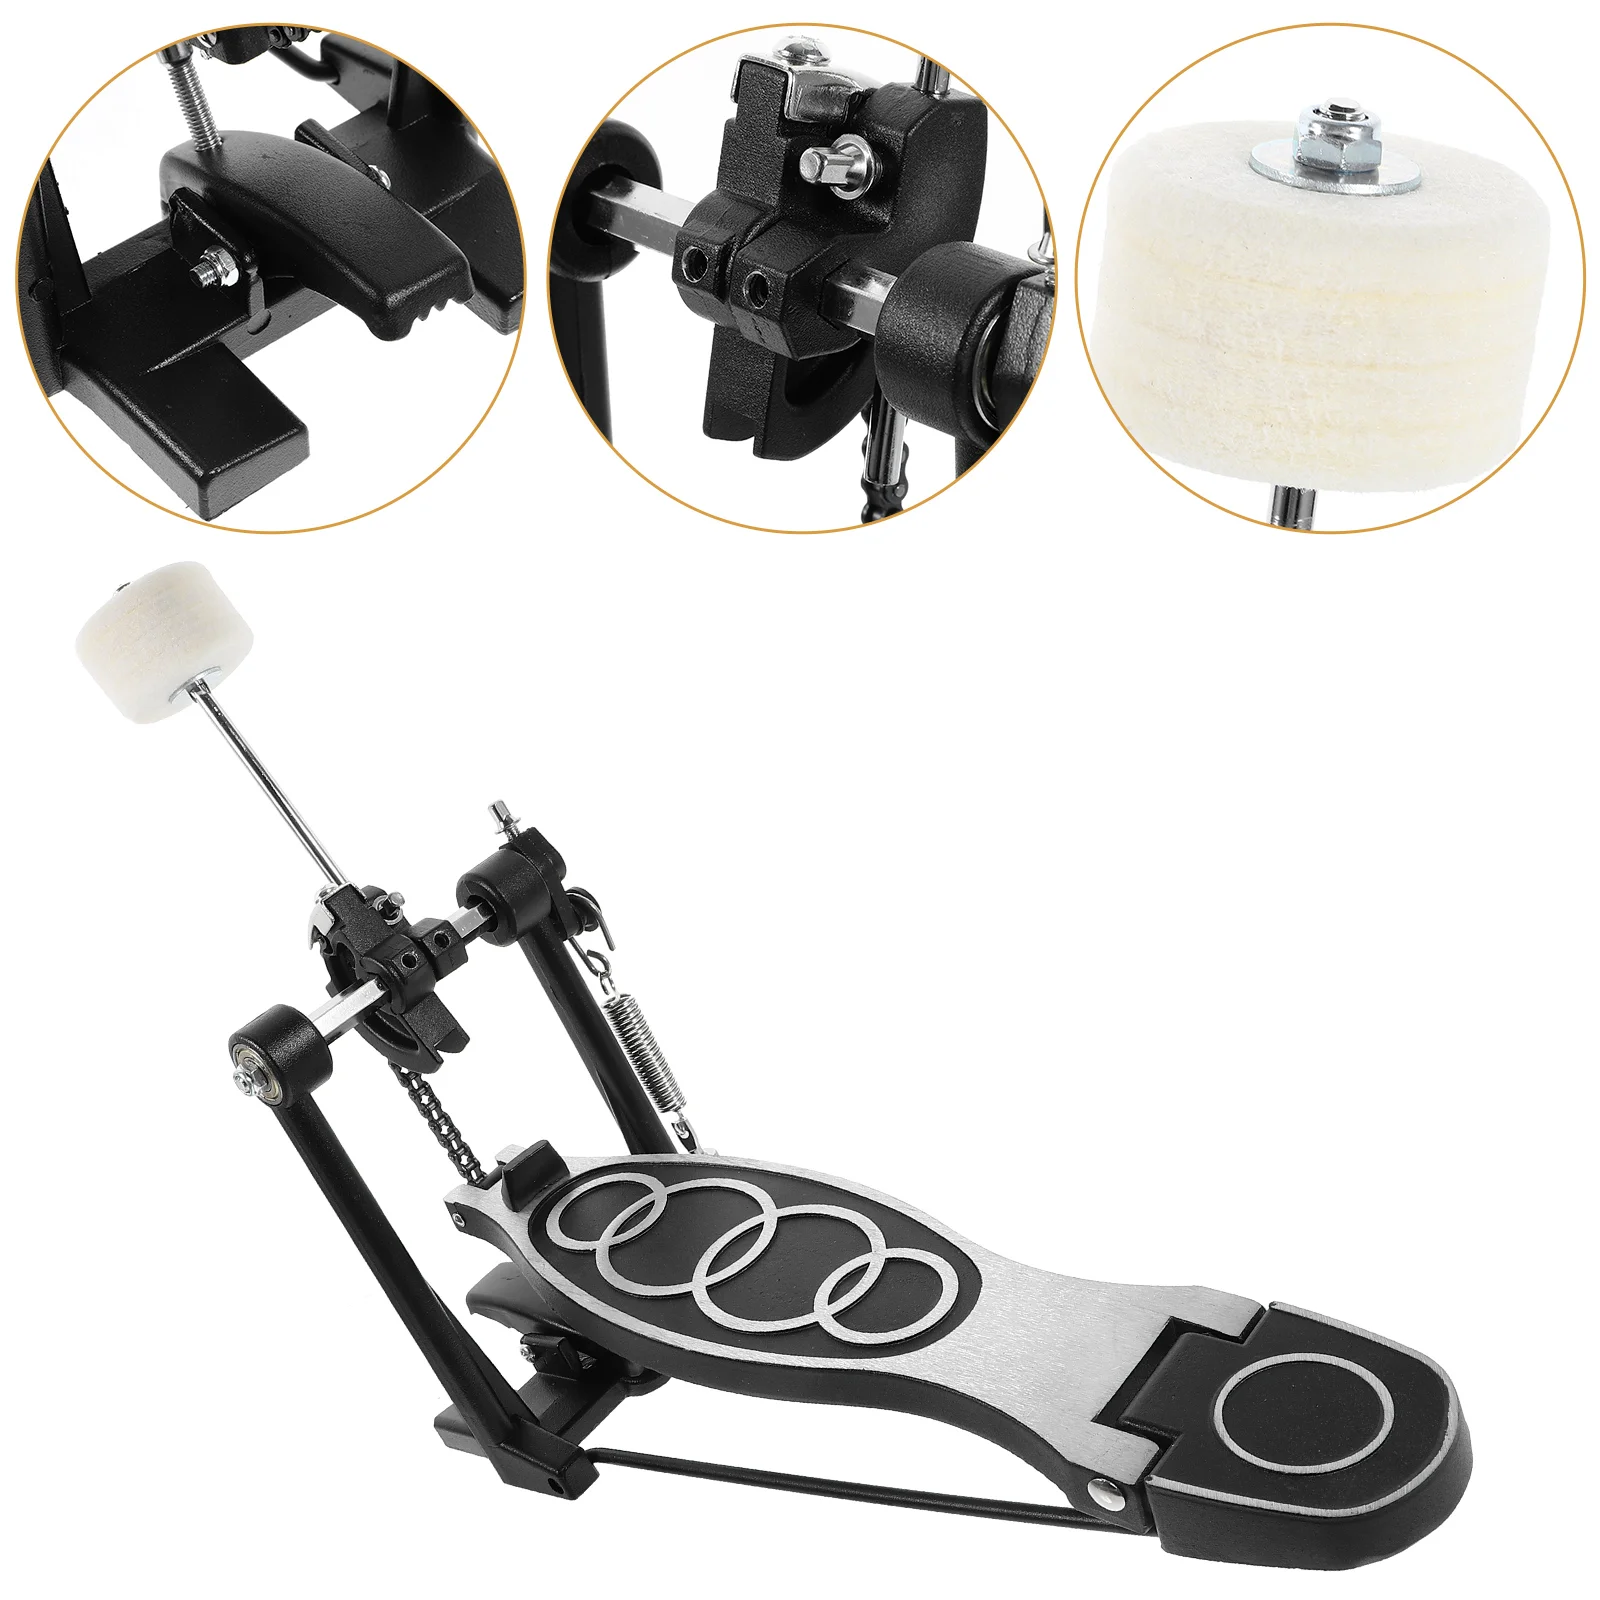 

Drum Single Hammer Pedal Accessories 1pcs Percussion Instrument Accessory Kit Bass Parts For Replacement Professional